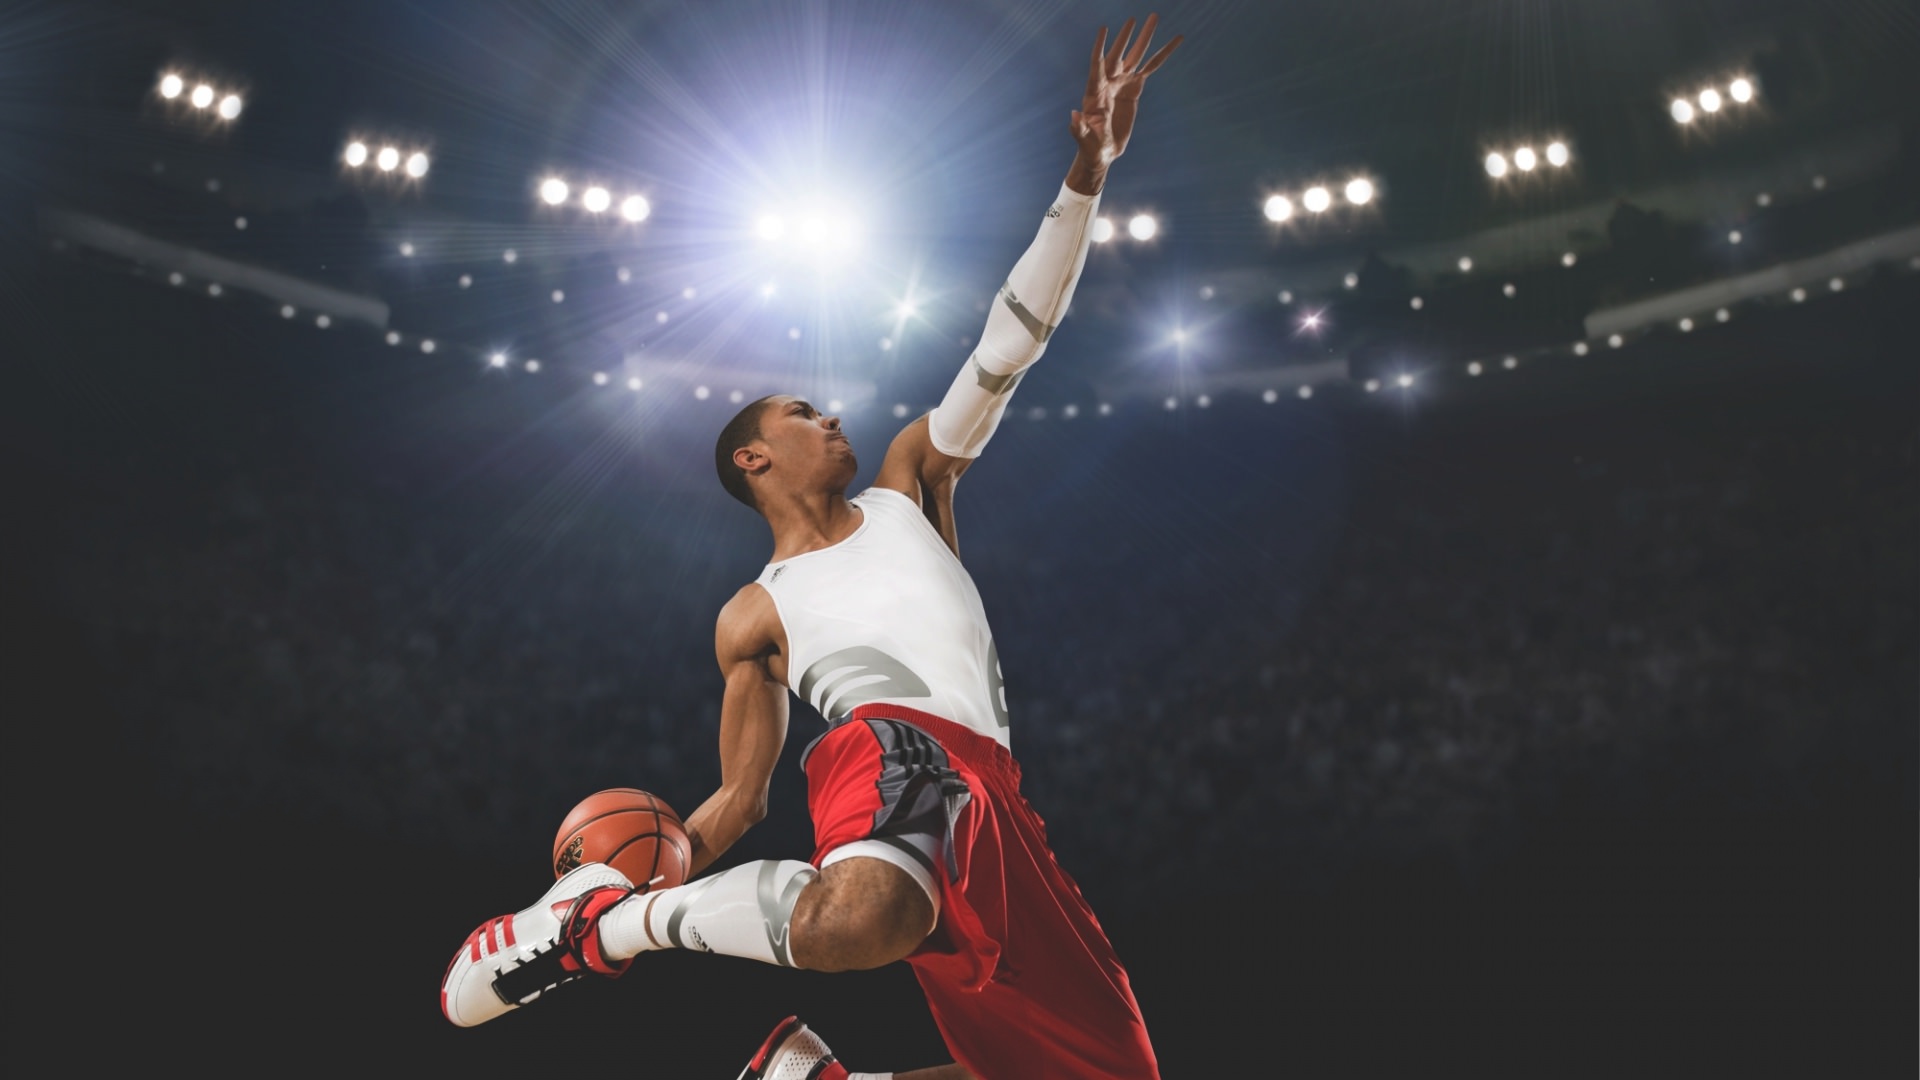 30+ Basketball Backgrounds, Wallpapers, Images, Pictures ...